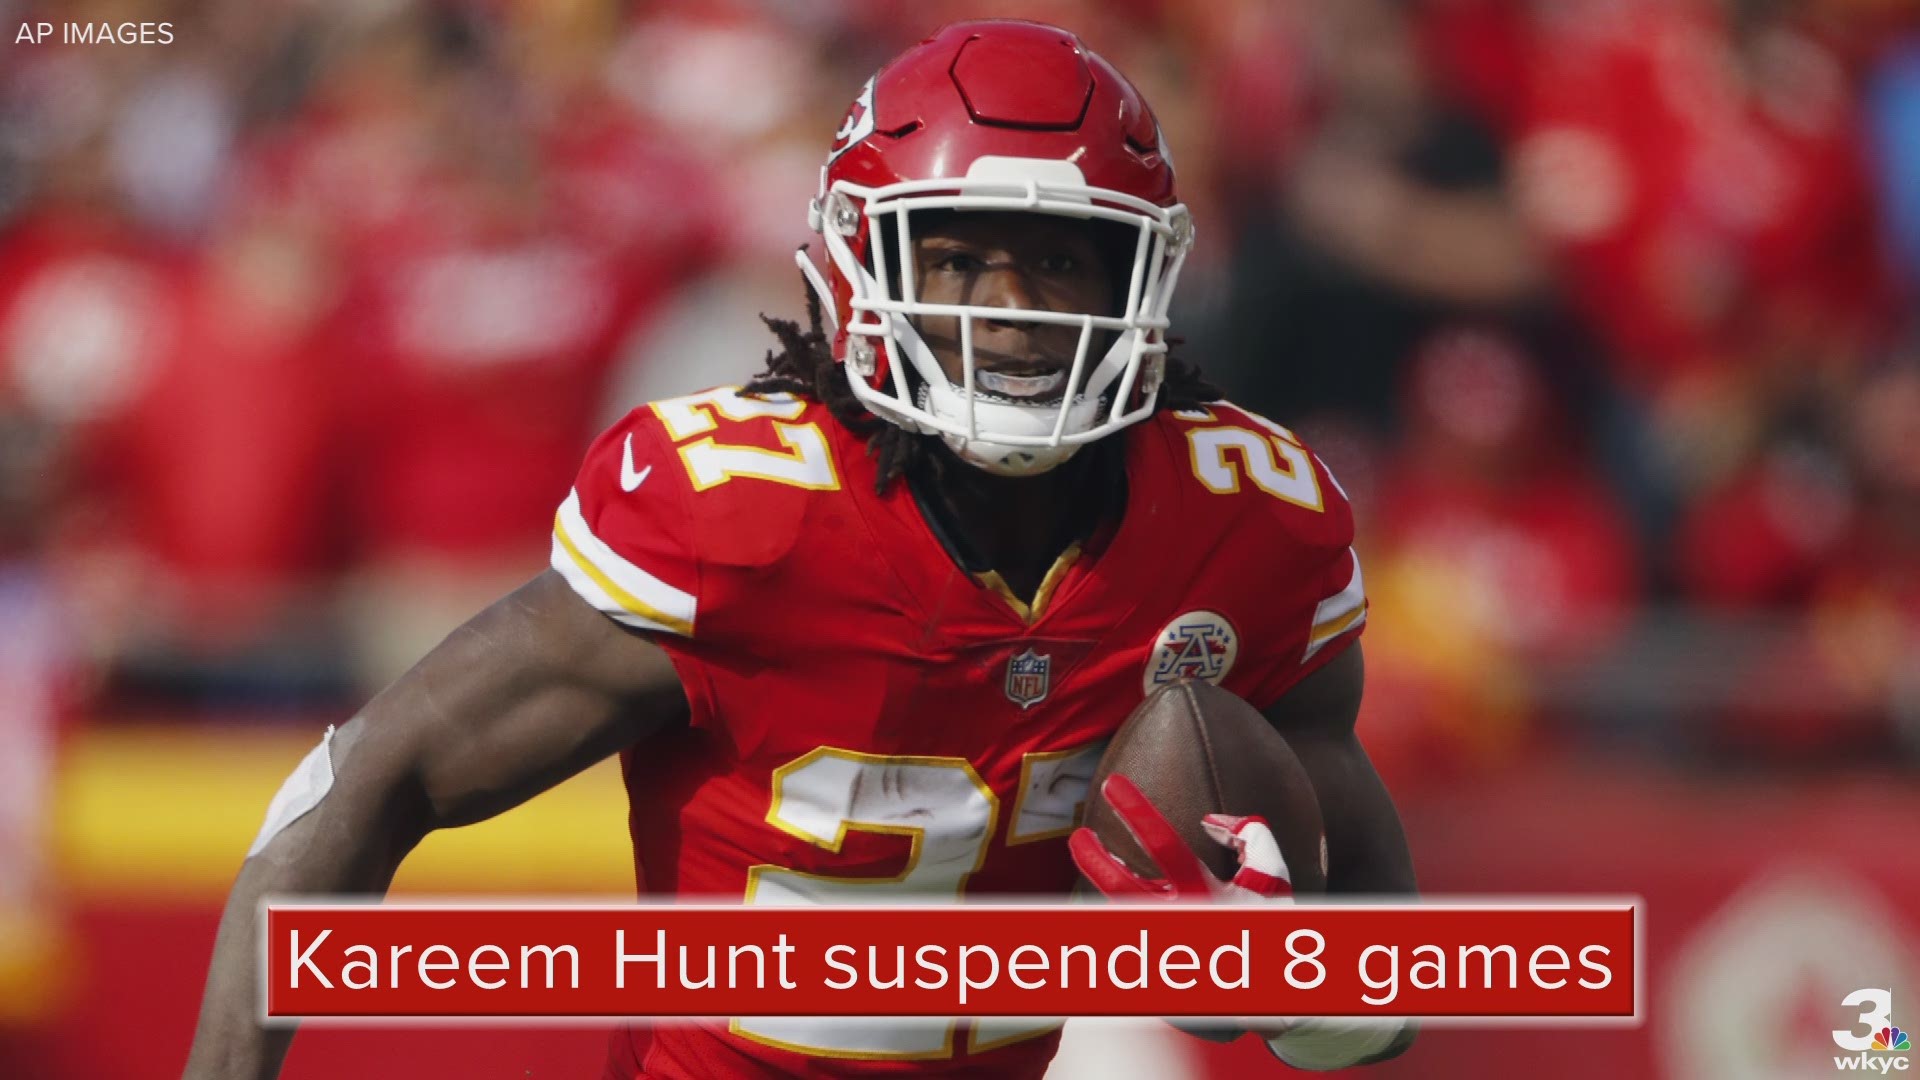 The NFL announced on Friday that it has suspended Cleveland Browns running back Kareem Hunt for the first eight games of the 2019 season for violating its personal conduct policy.